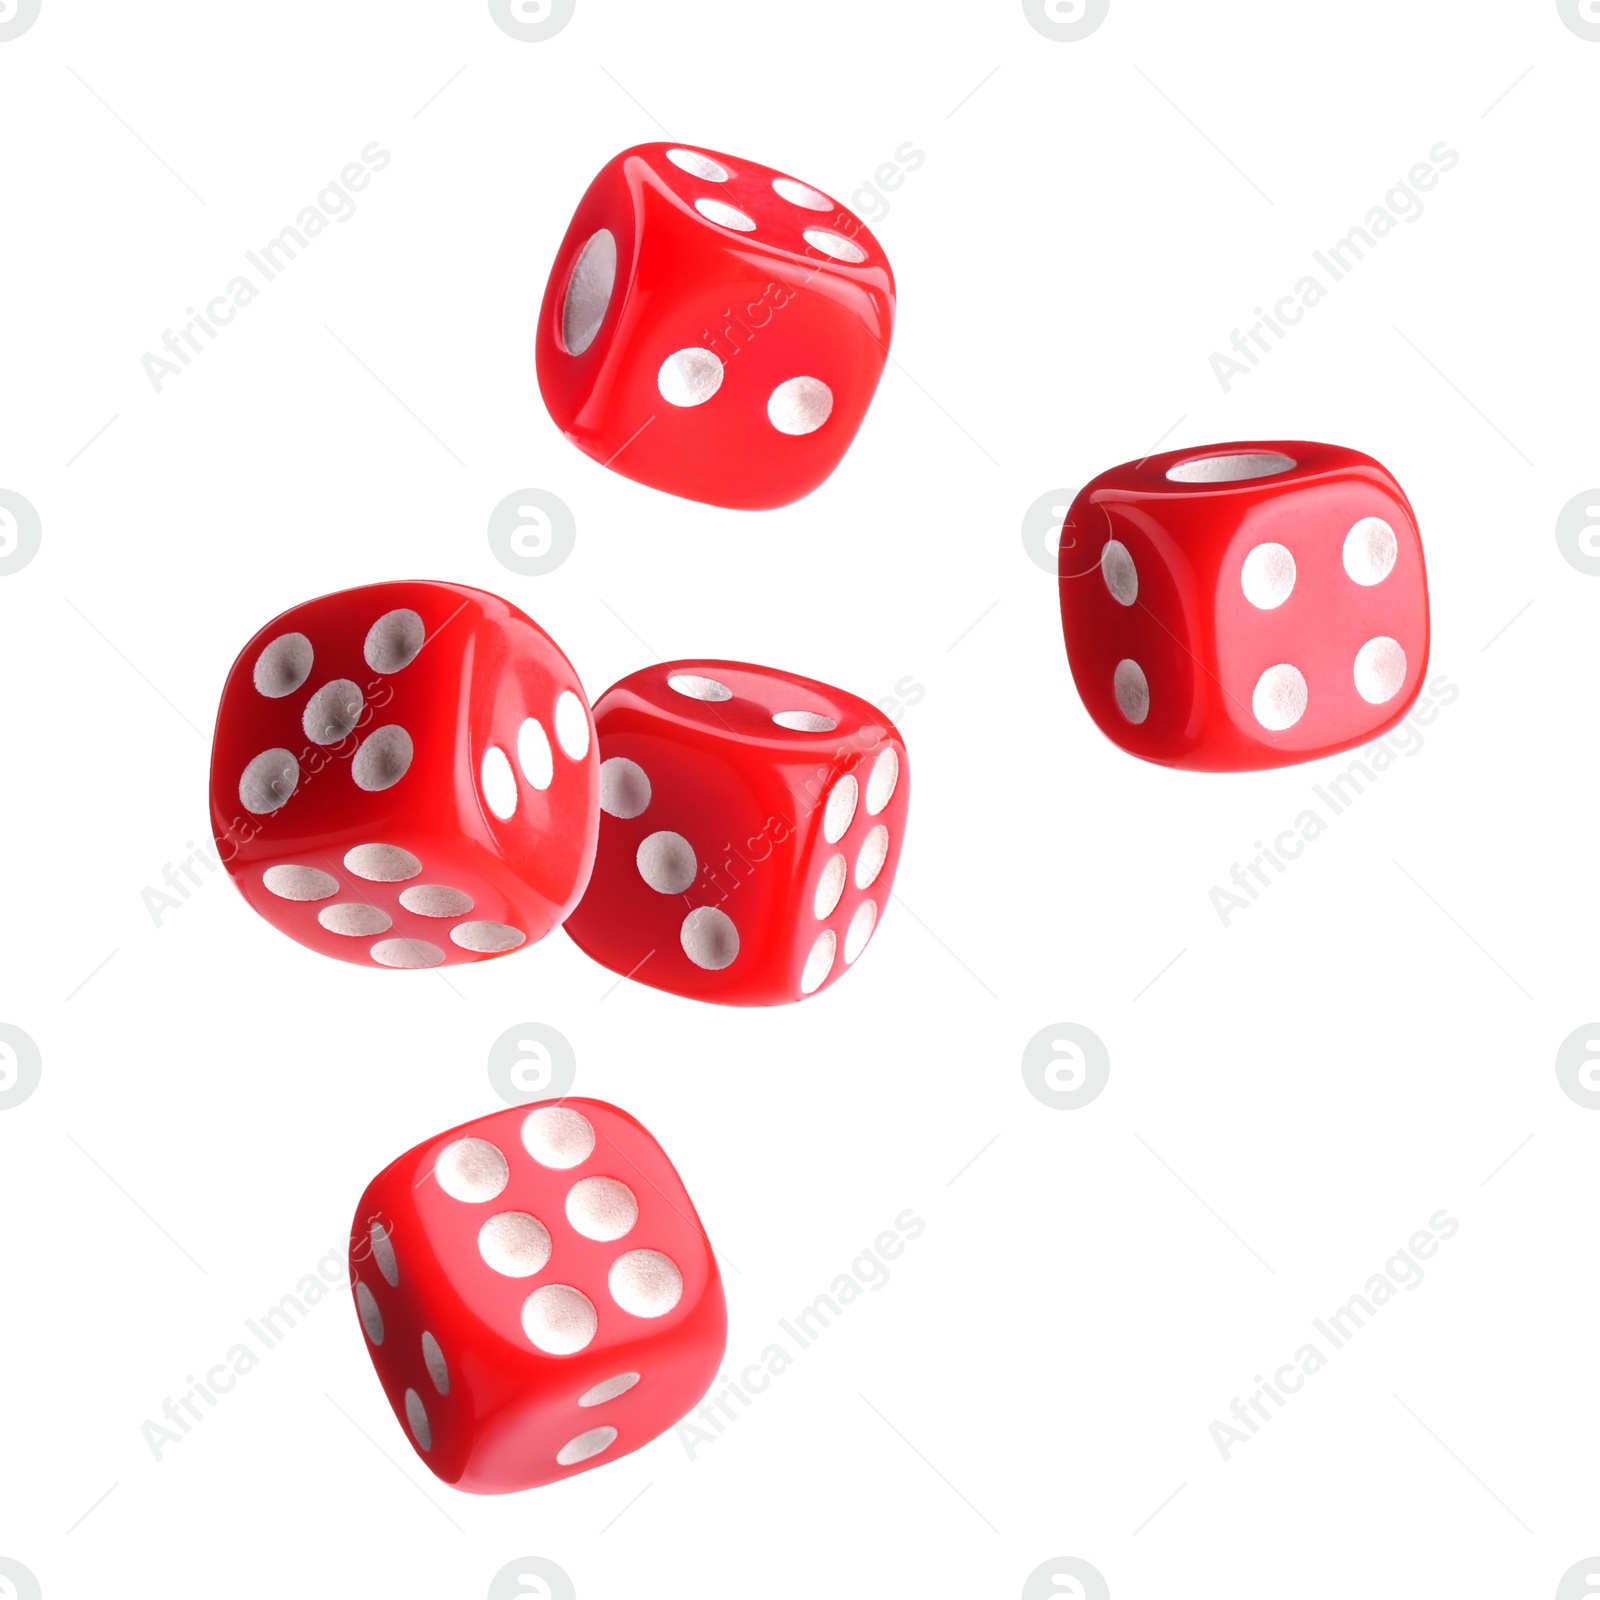 Image of Five red dice in air on white background